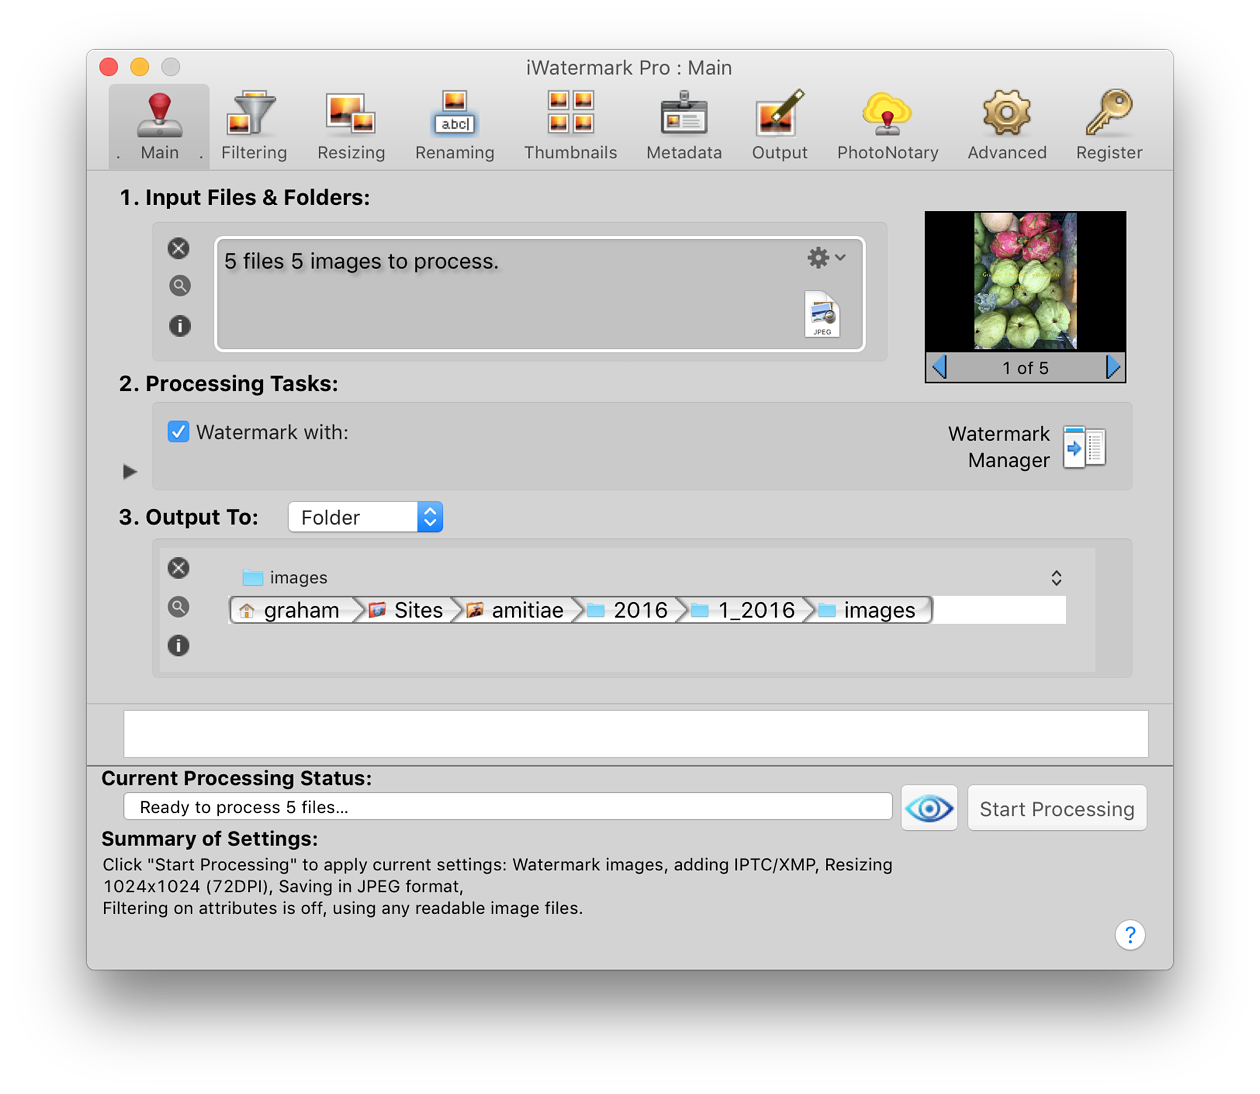 iWatermark Pro for OS X